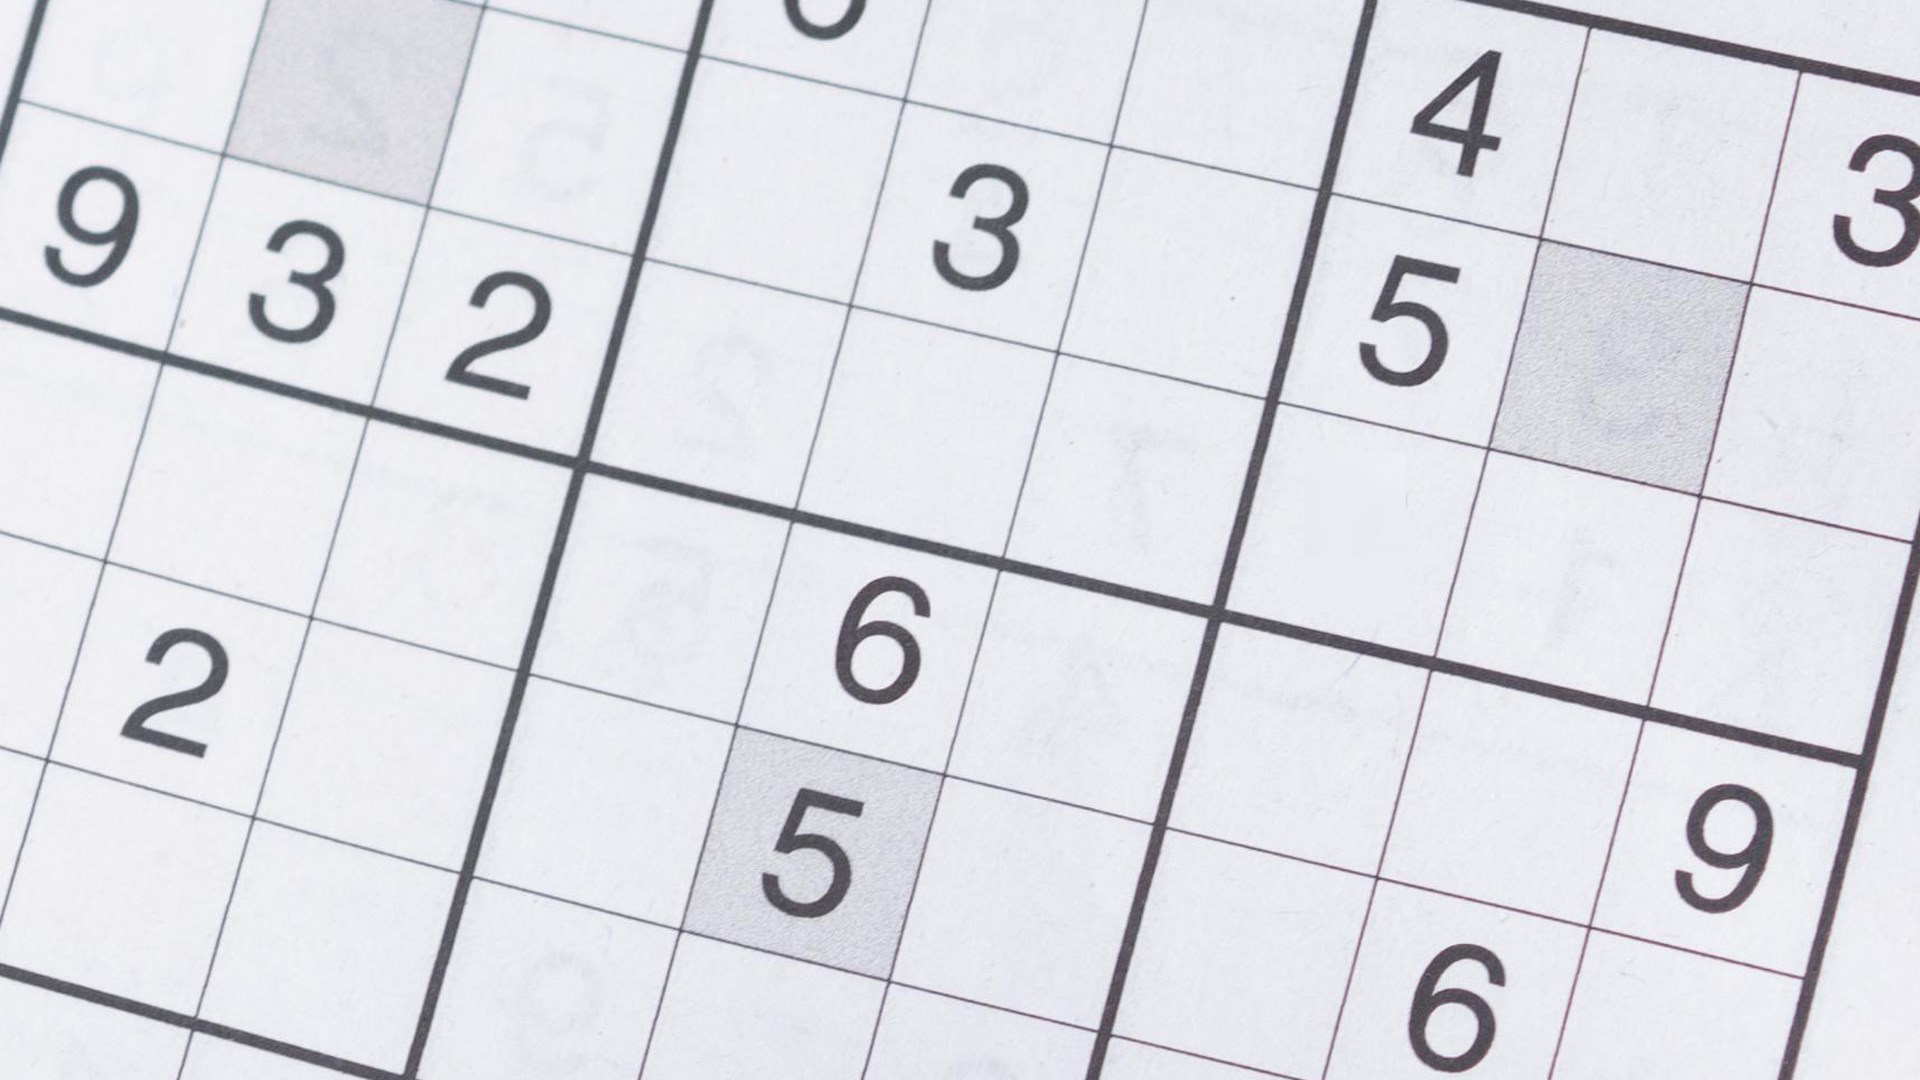 How to Solve a Sudoku Puzzle Using Azure AI